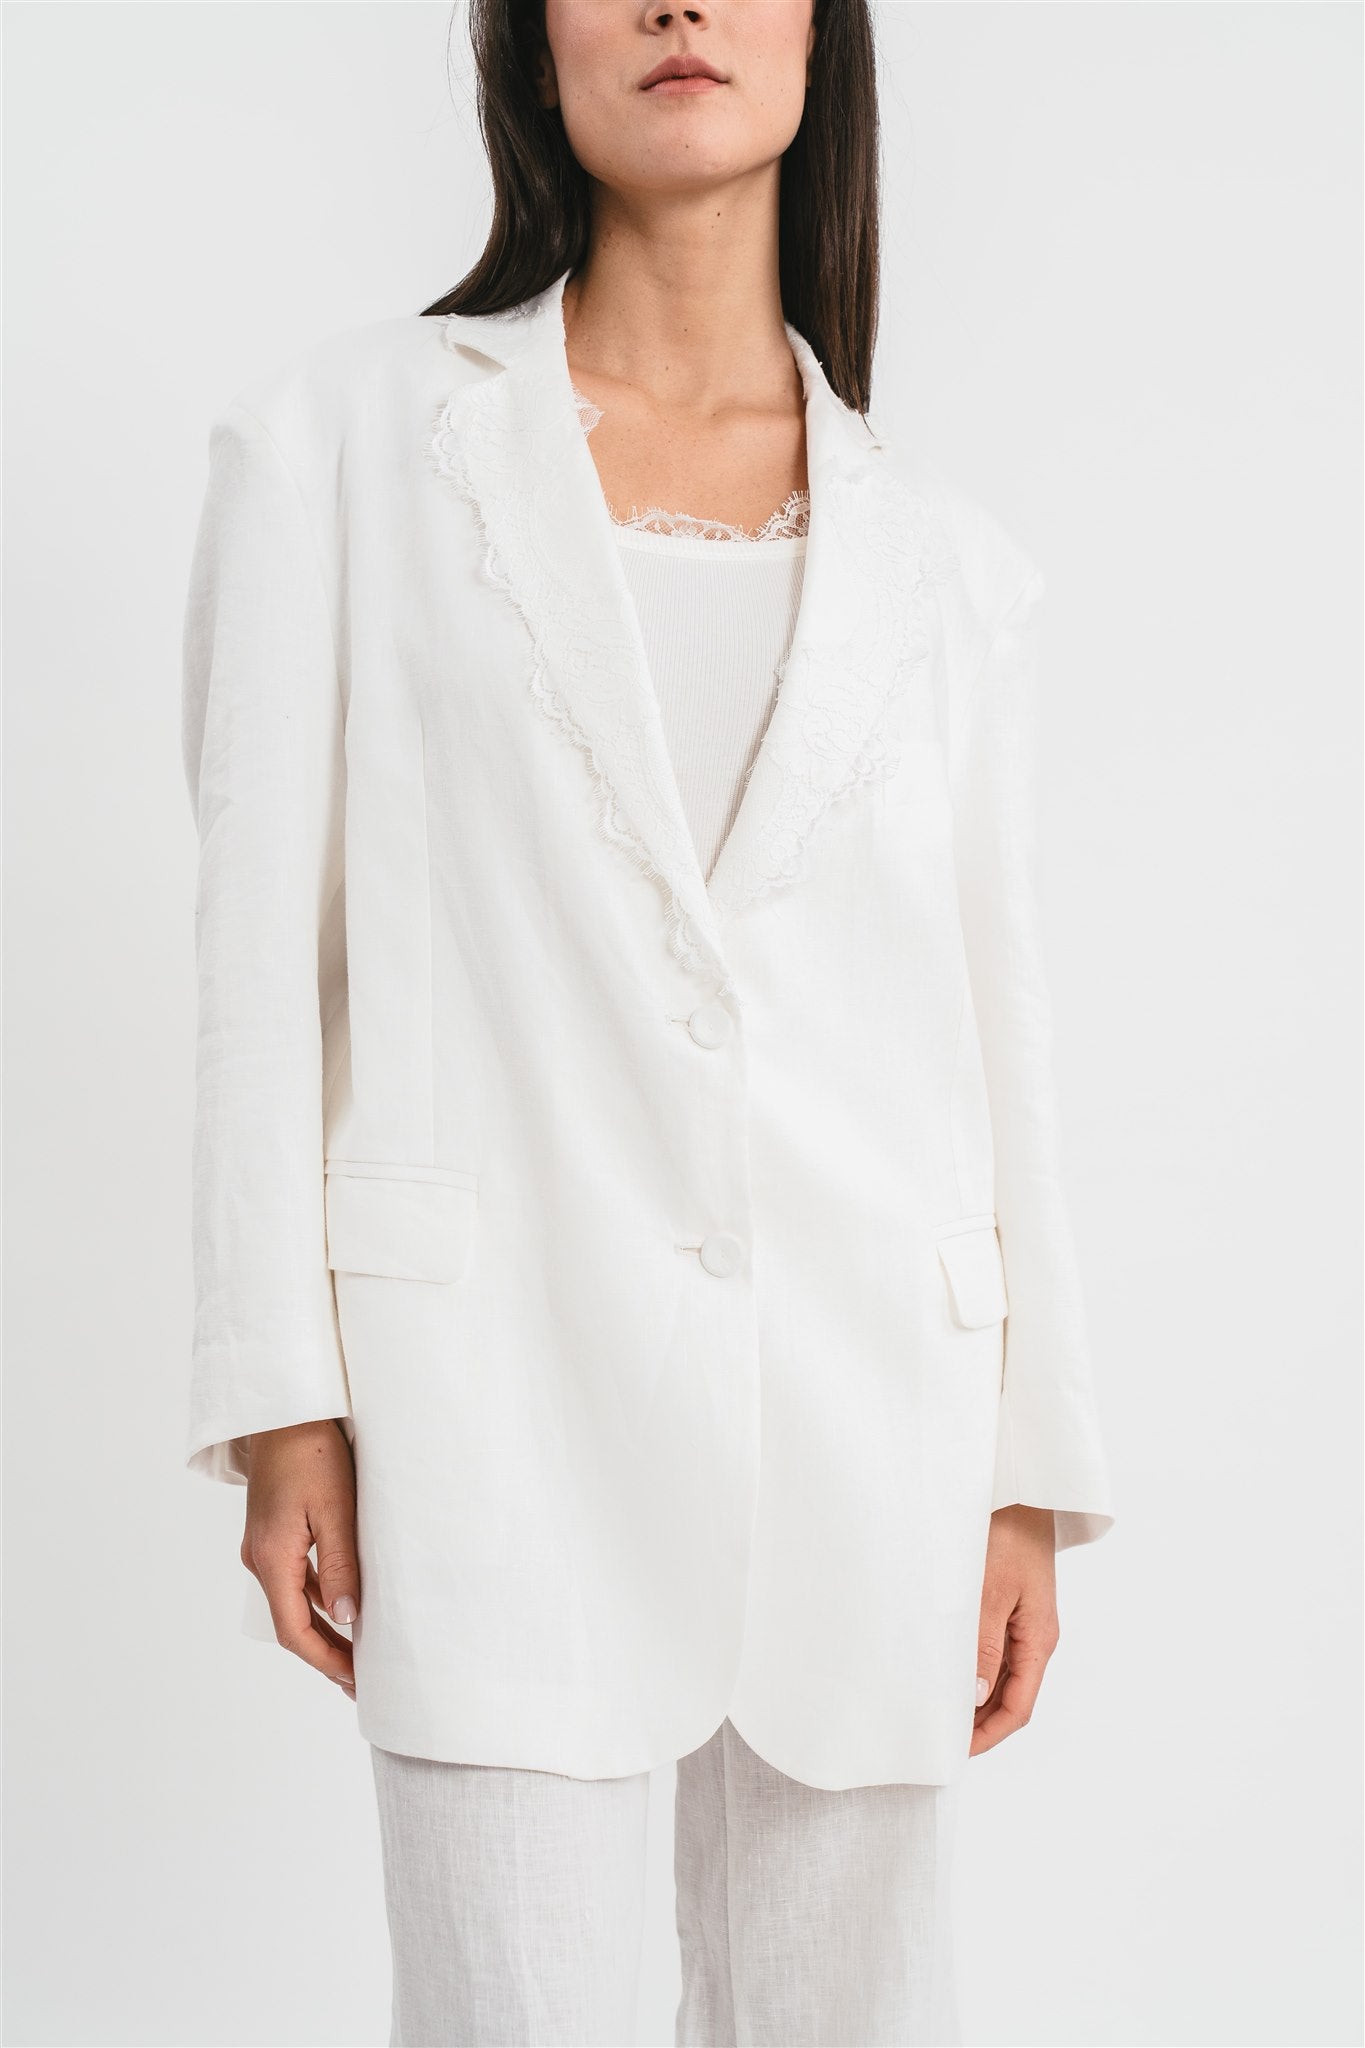 Linen jacket with lace details